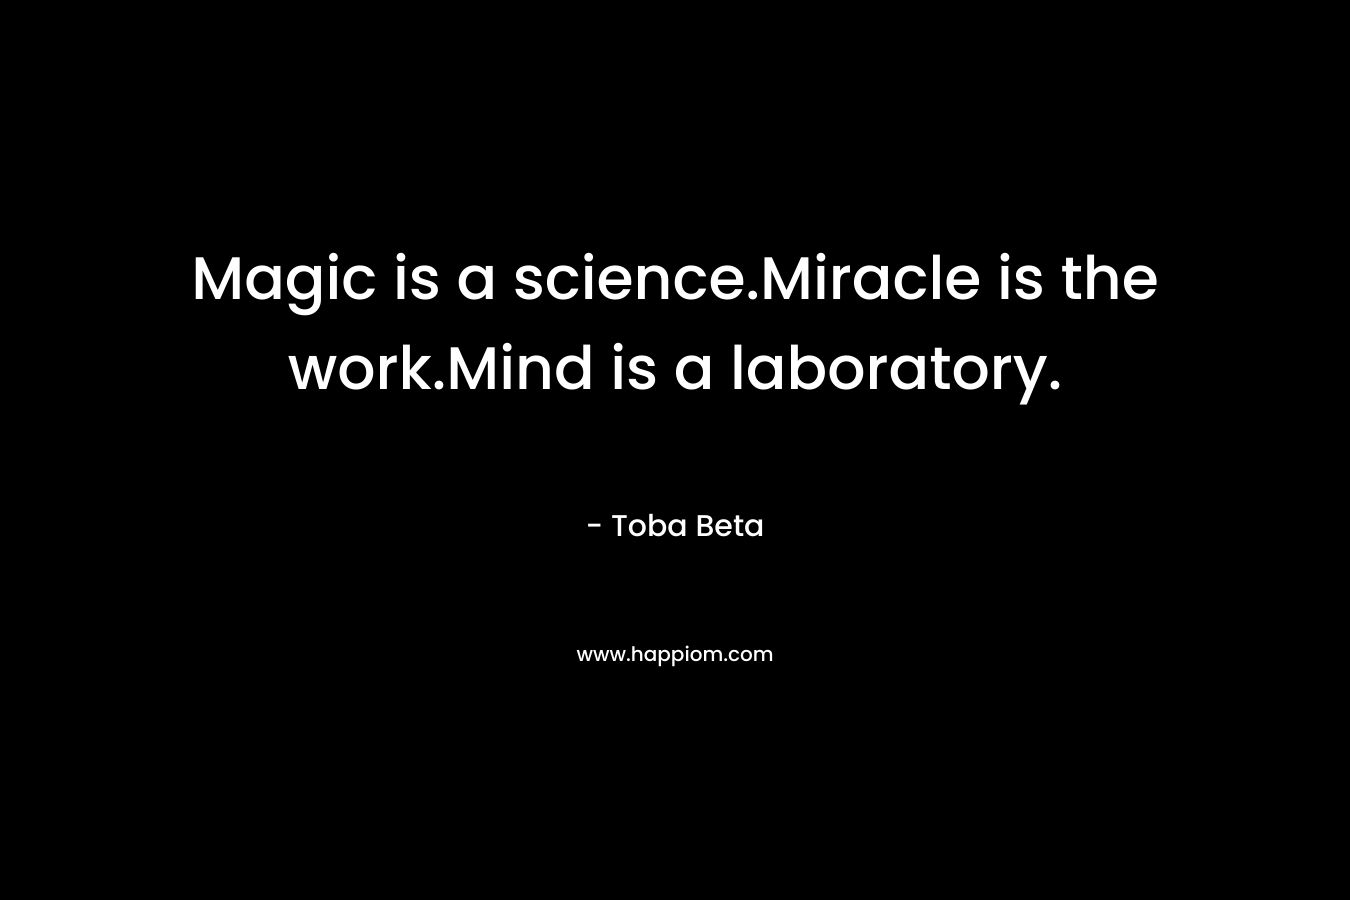 Magic is a science.Miracle is the work.Mind is a laboratory. – Toba Beta